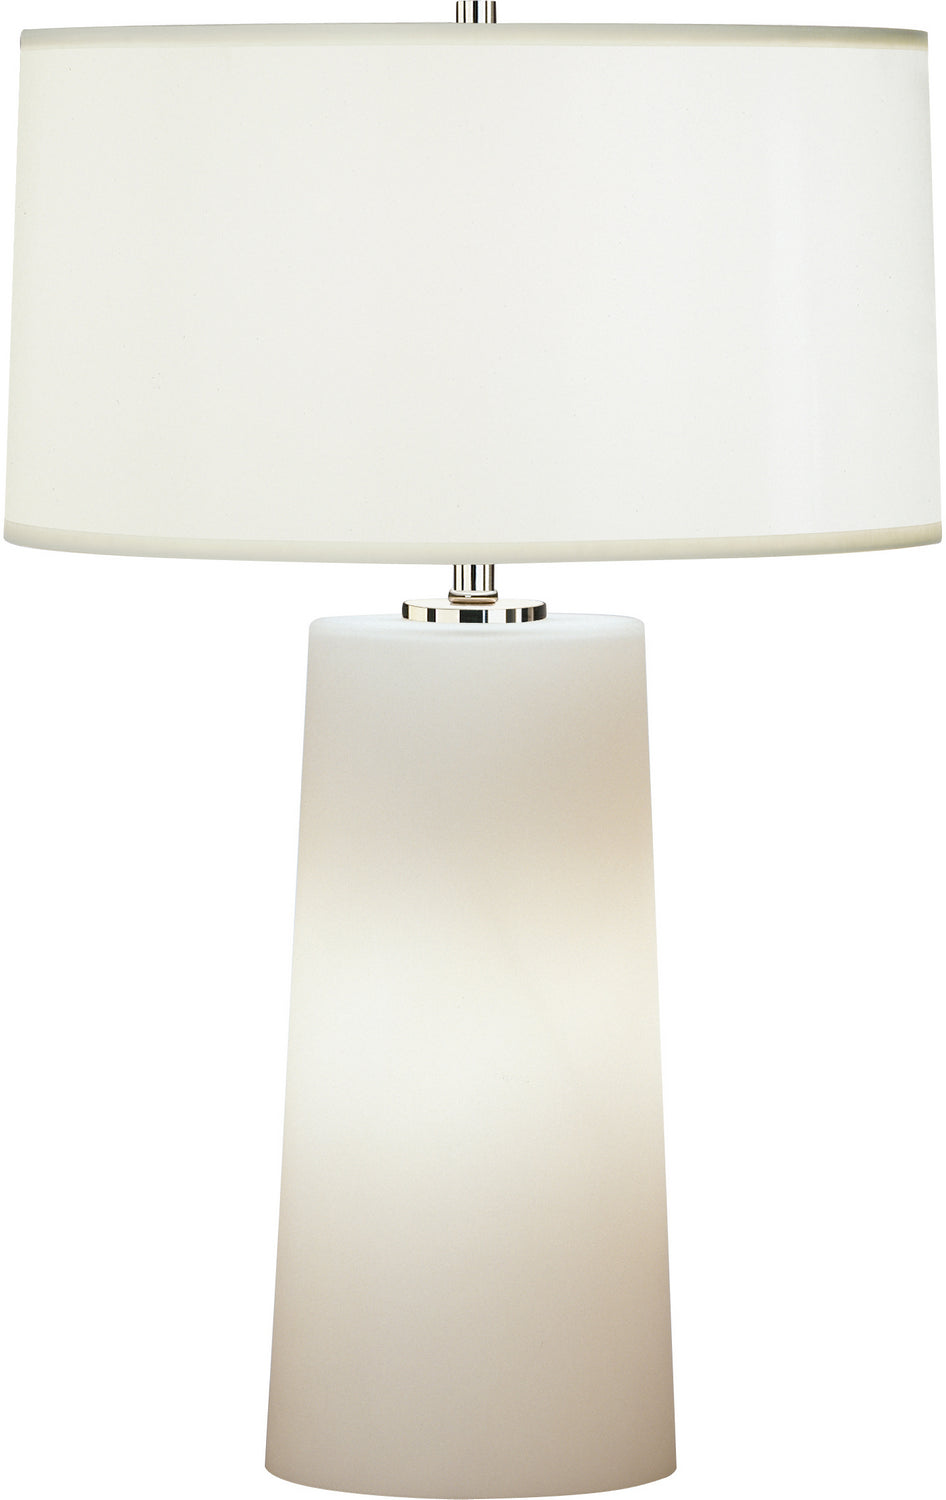 Robert Abbey - Two Light Accent Lamp - Rico Espinet Olinda - Frosted White Cased Glass Base w/Night Light- Union Lighting Luminaires Decor